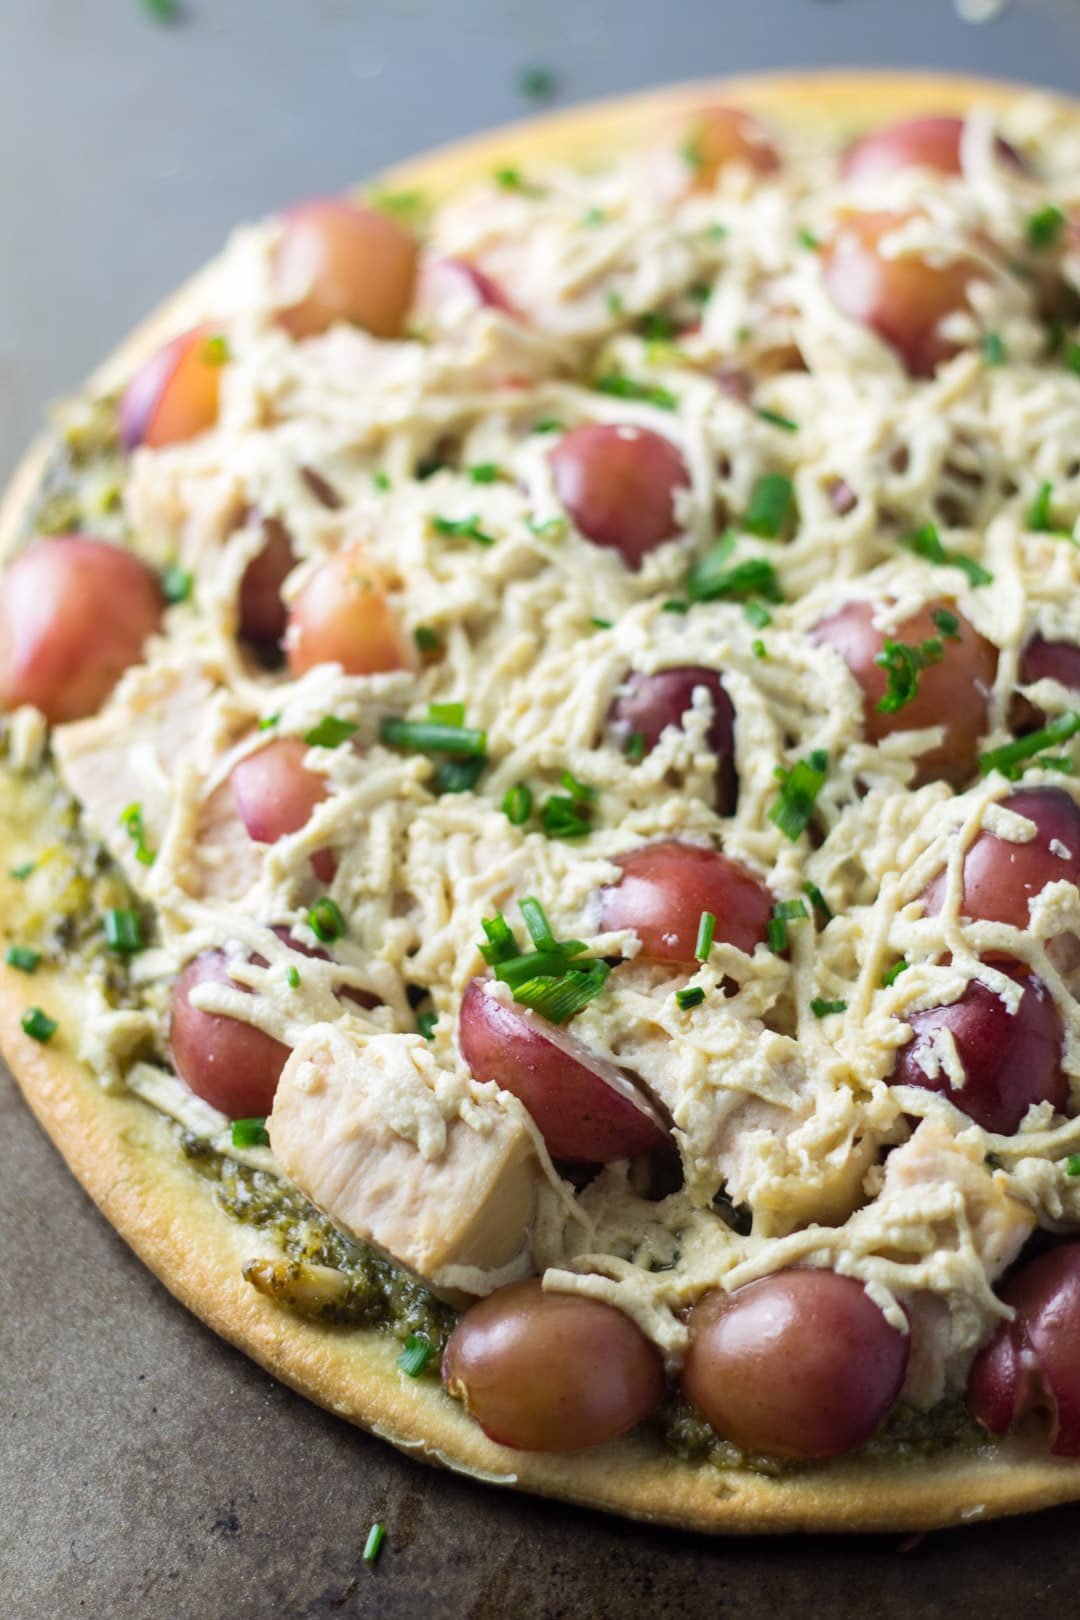 A pizza made with grapes, chicken, pesto, and dairy-free mozzarella-style cheese.